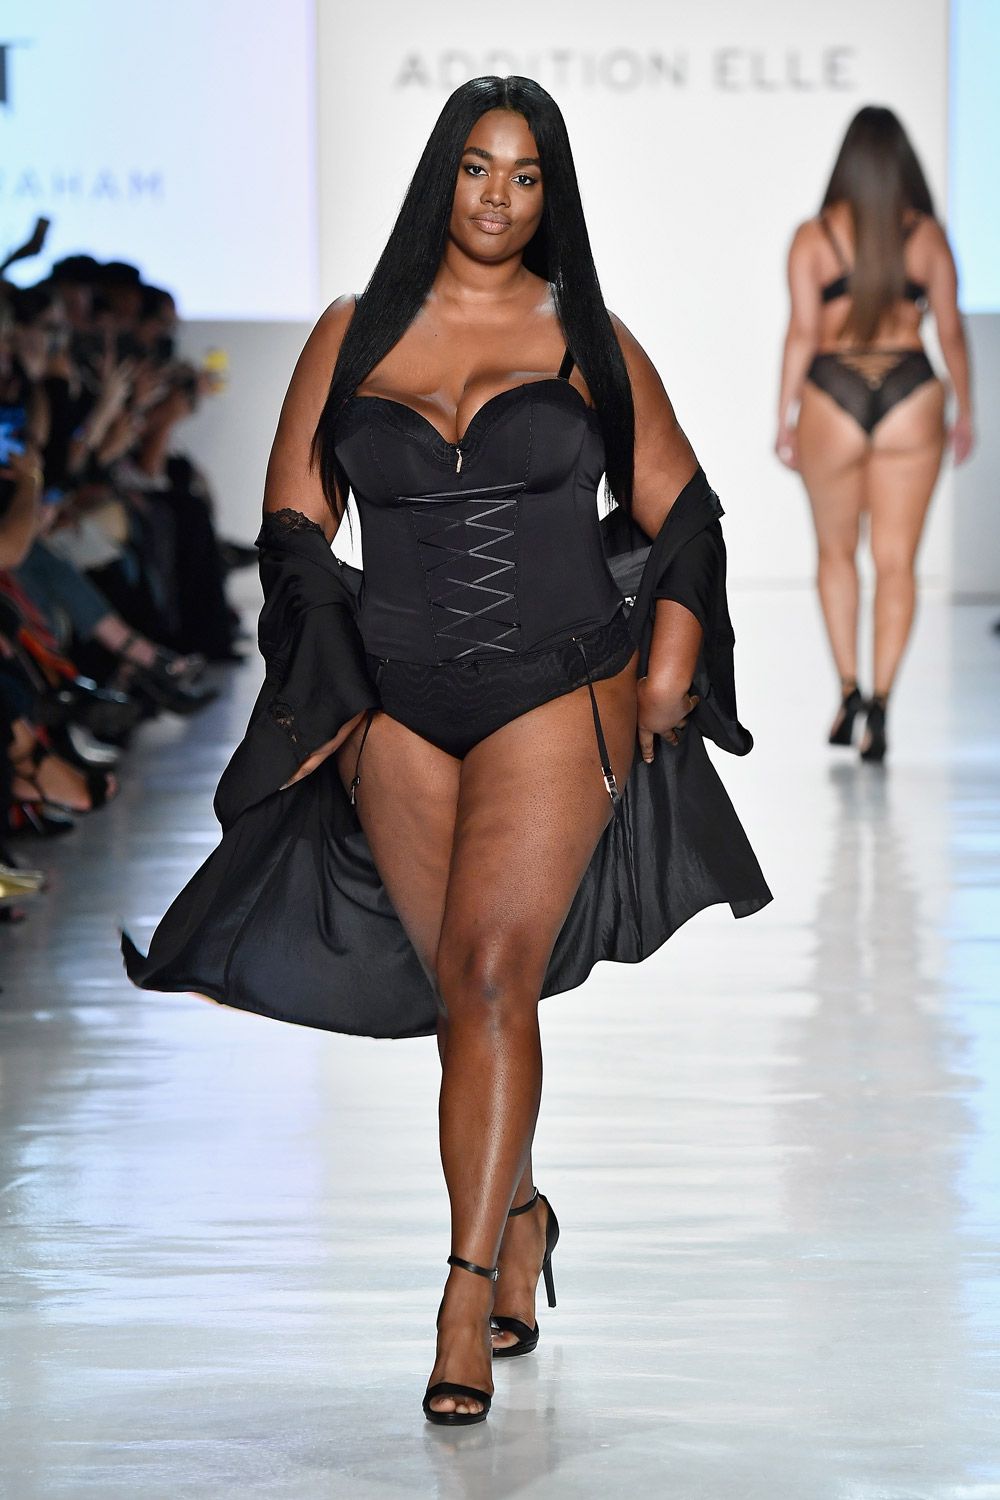 Forget Victoria's Secret, Ashley Graham's lingerie NYFW show is the one we  should be celebrating